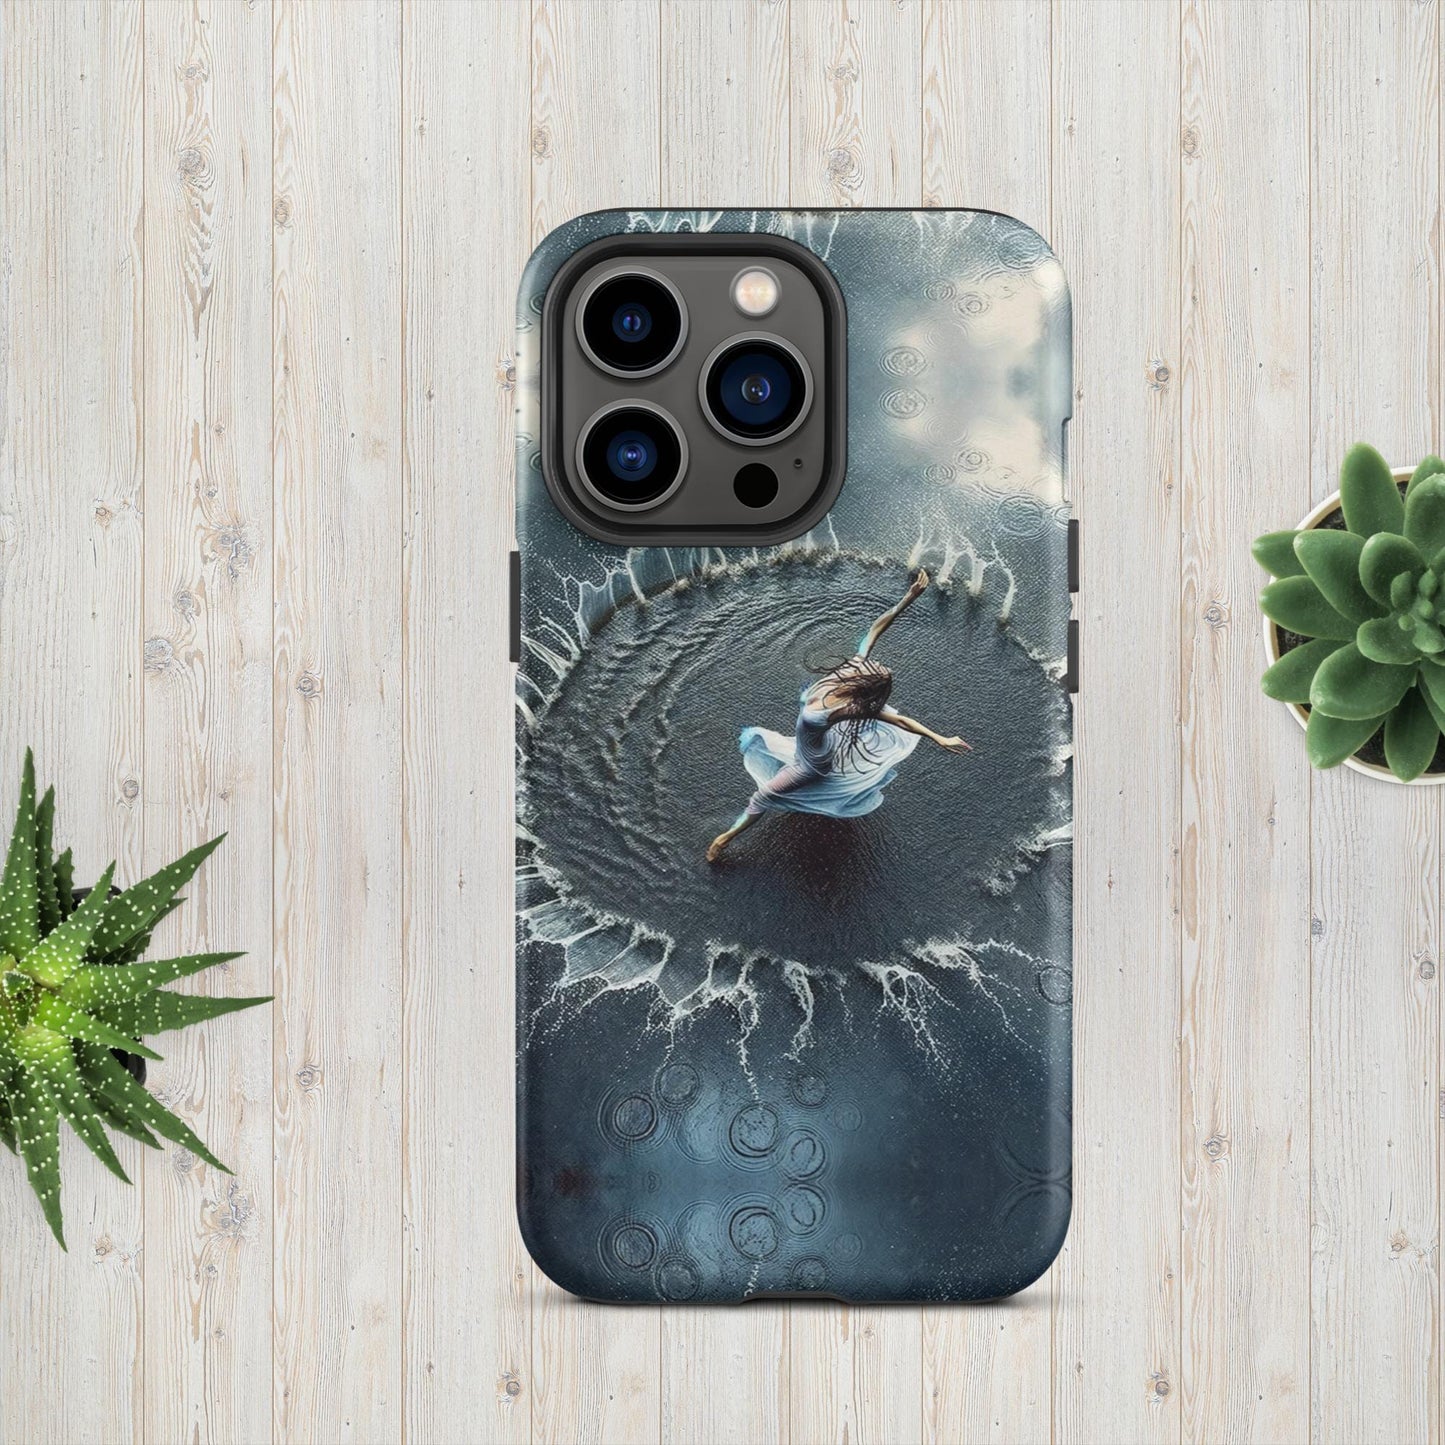 The Hologram Hook Up Puddle Dance Tough Case for iPhone®